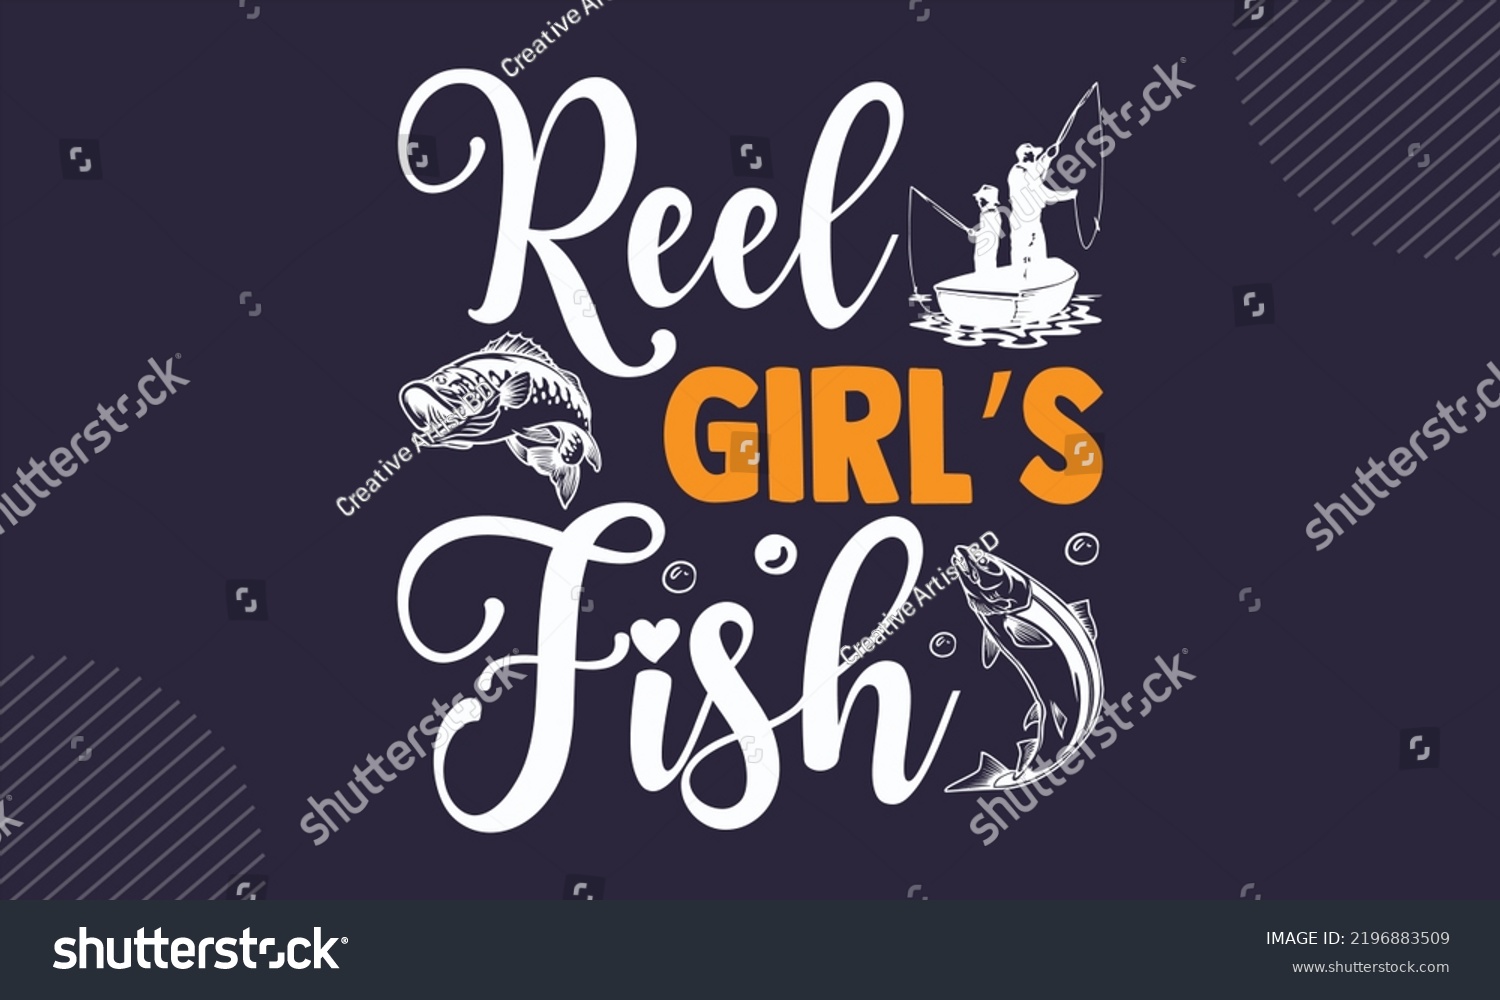 SVG of Reel Girl’s Fish - Fishing T shirt Design, Hand drawn vintage illustration with hand-lettering and decoration elements, Cut Files for Cricut Svg, Digital Download svg